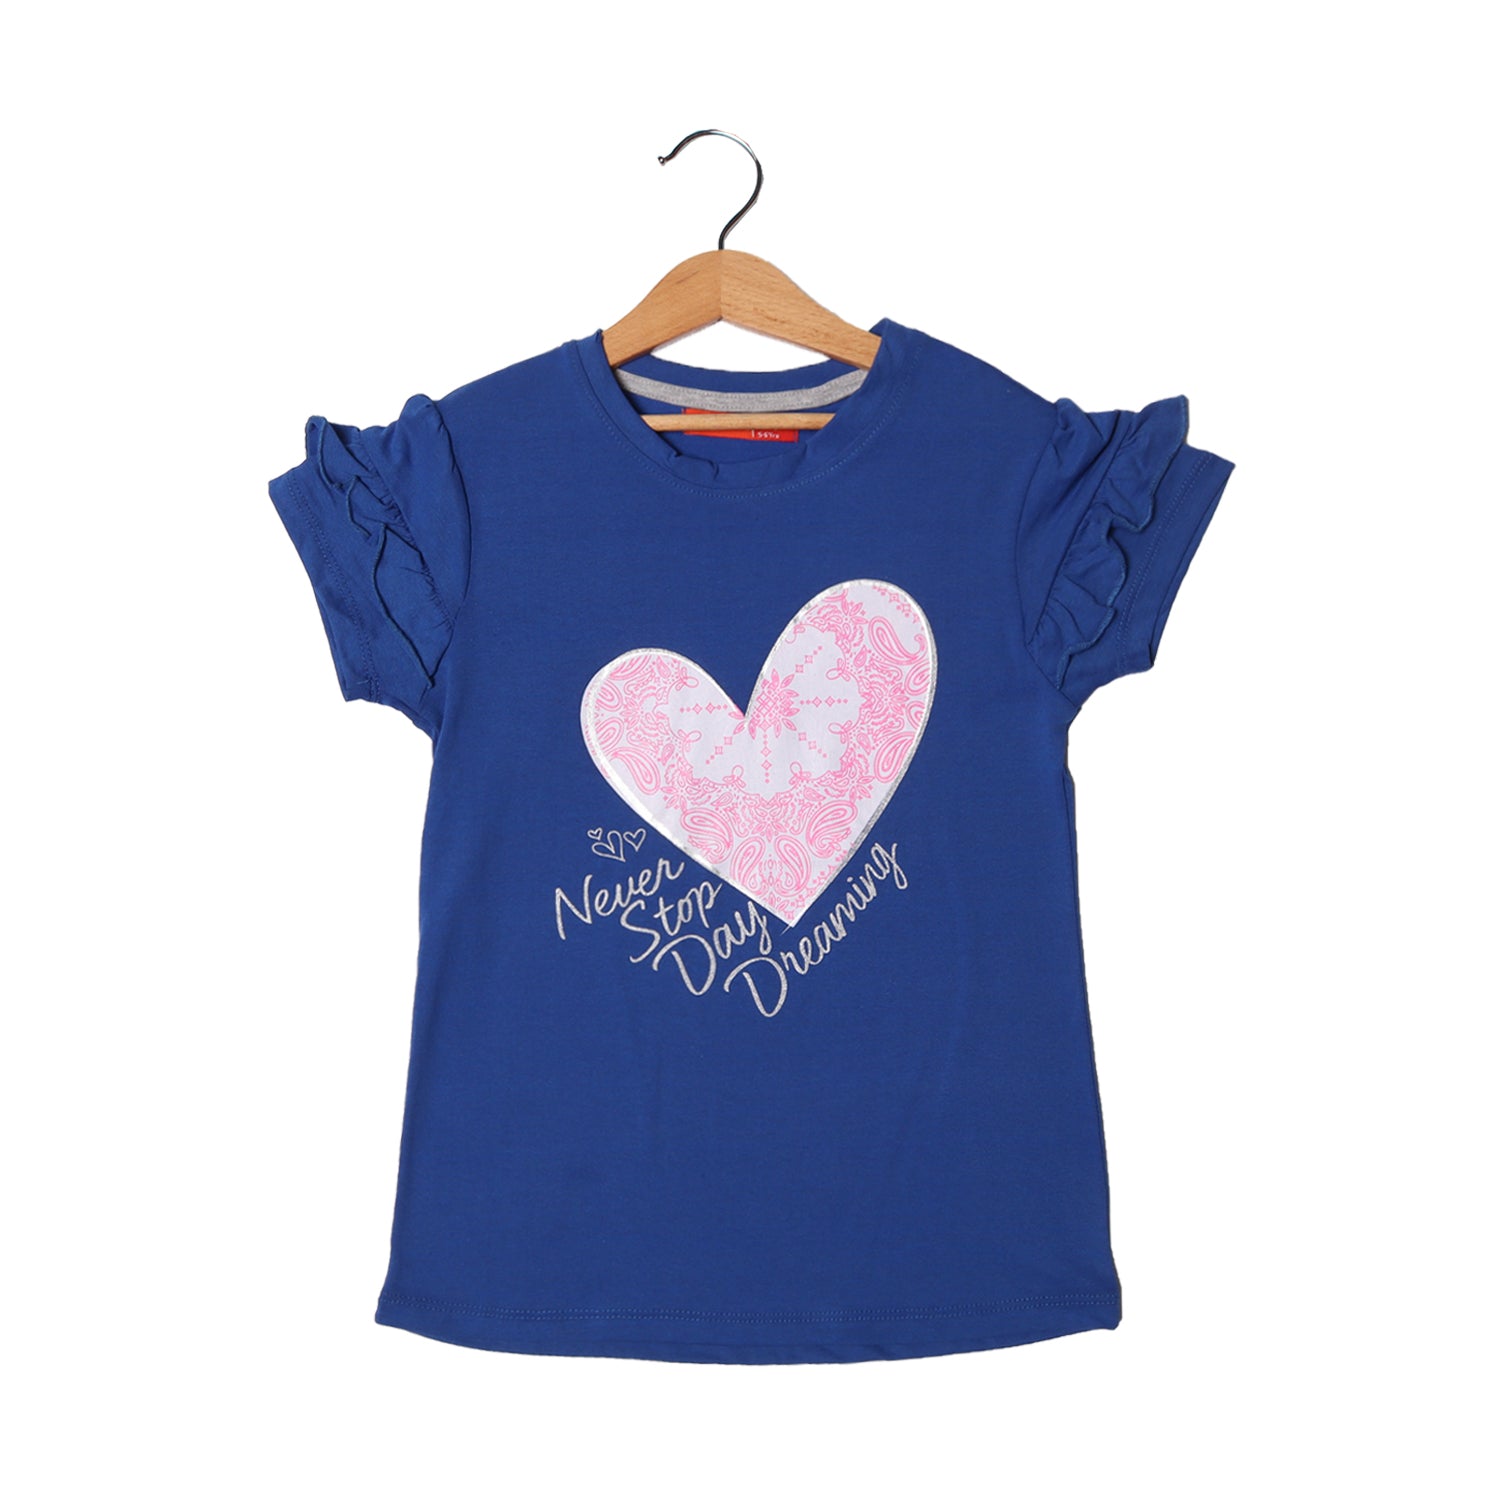 ROYAL BLUE NEVER STOP DAY DREAMING PRINTED T-SHIRT FOR GIRLS